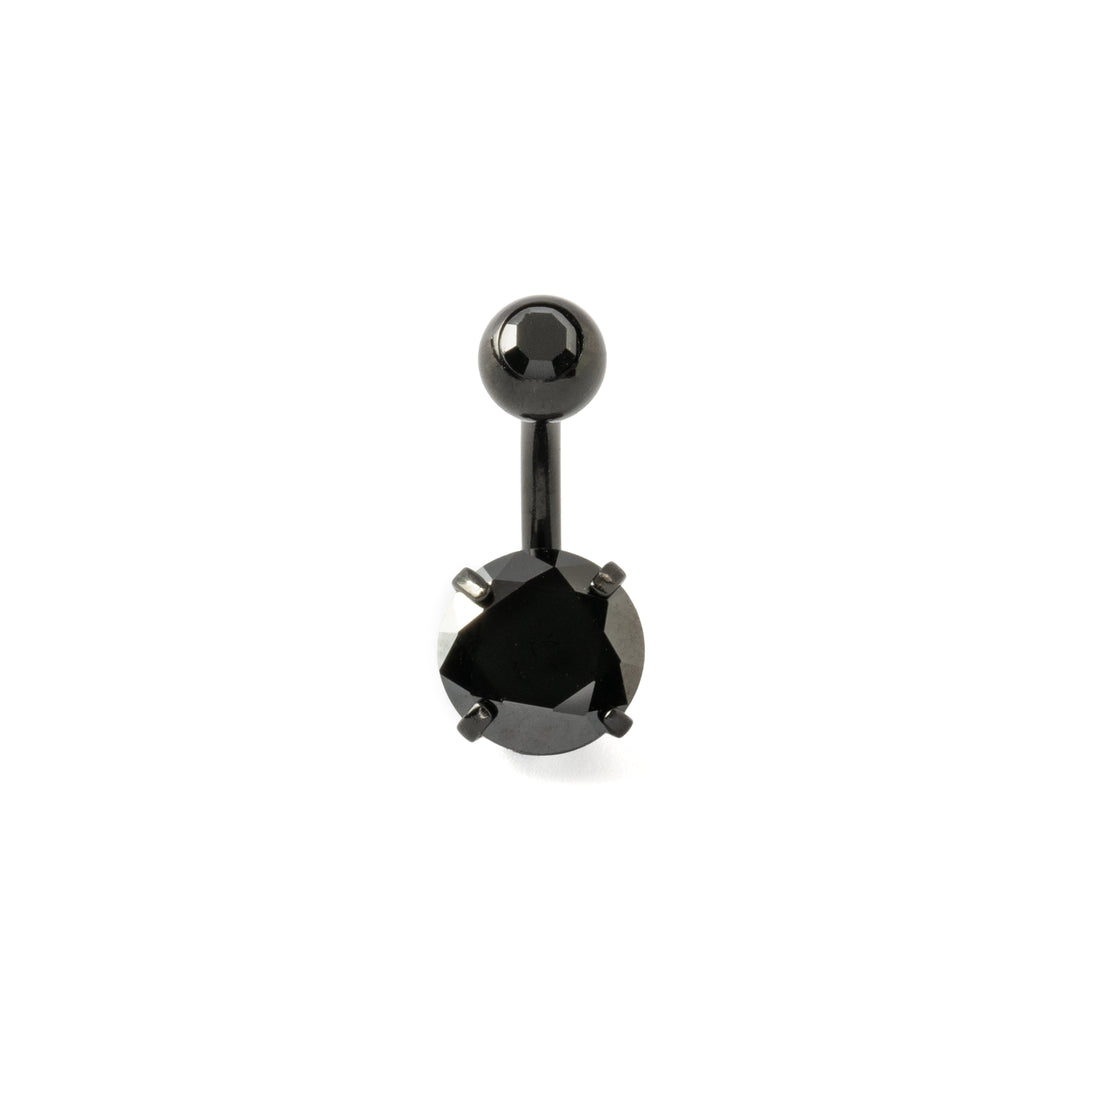 Black Magic Belly Bar frontal view